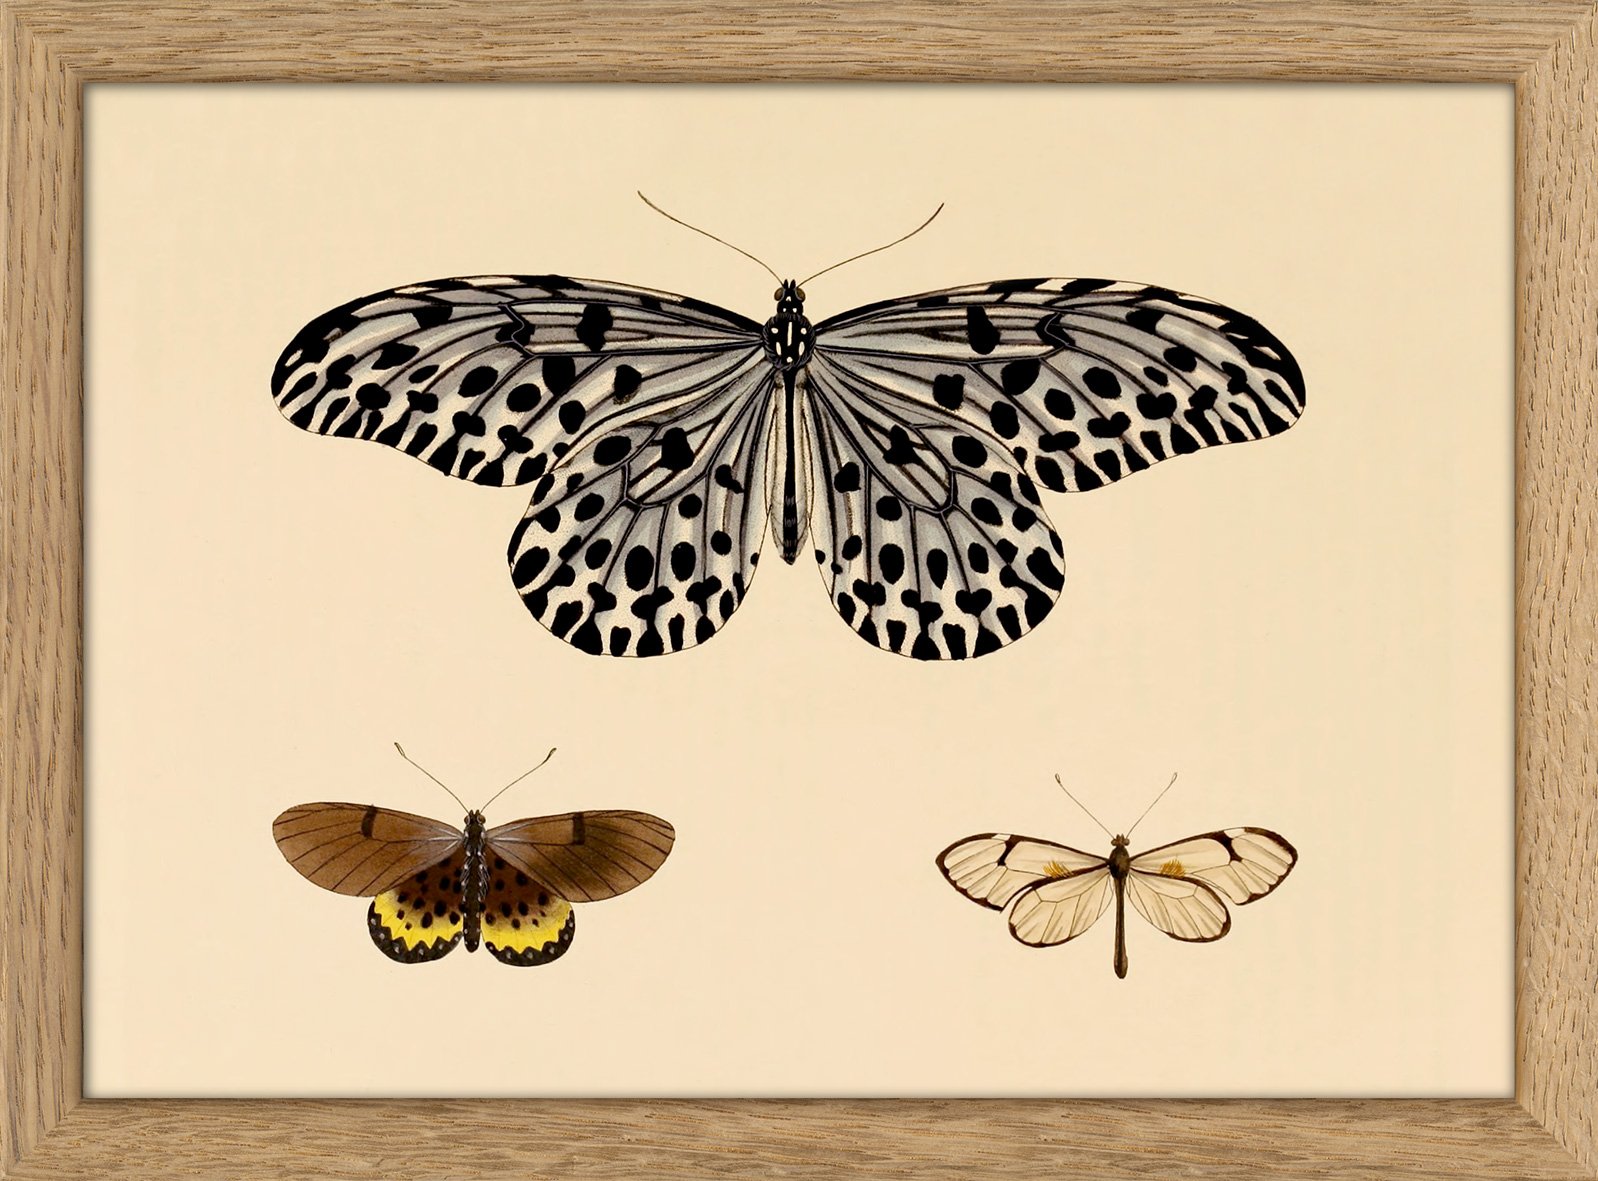 The Dybdahl Co. Soul Shaped Insects Print